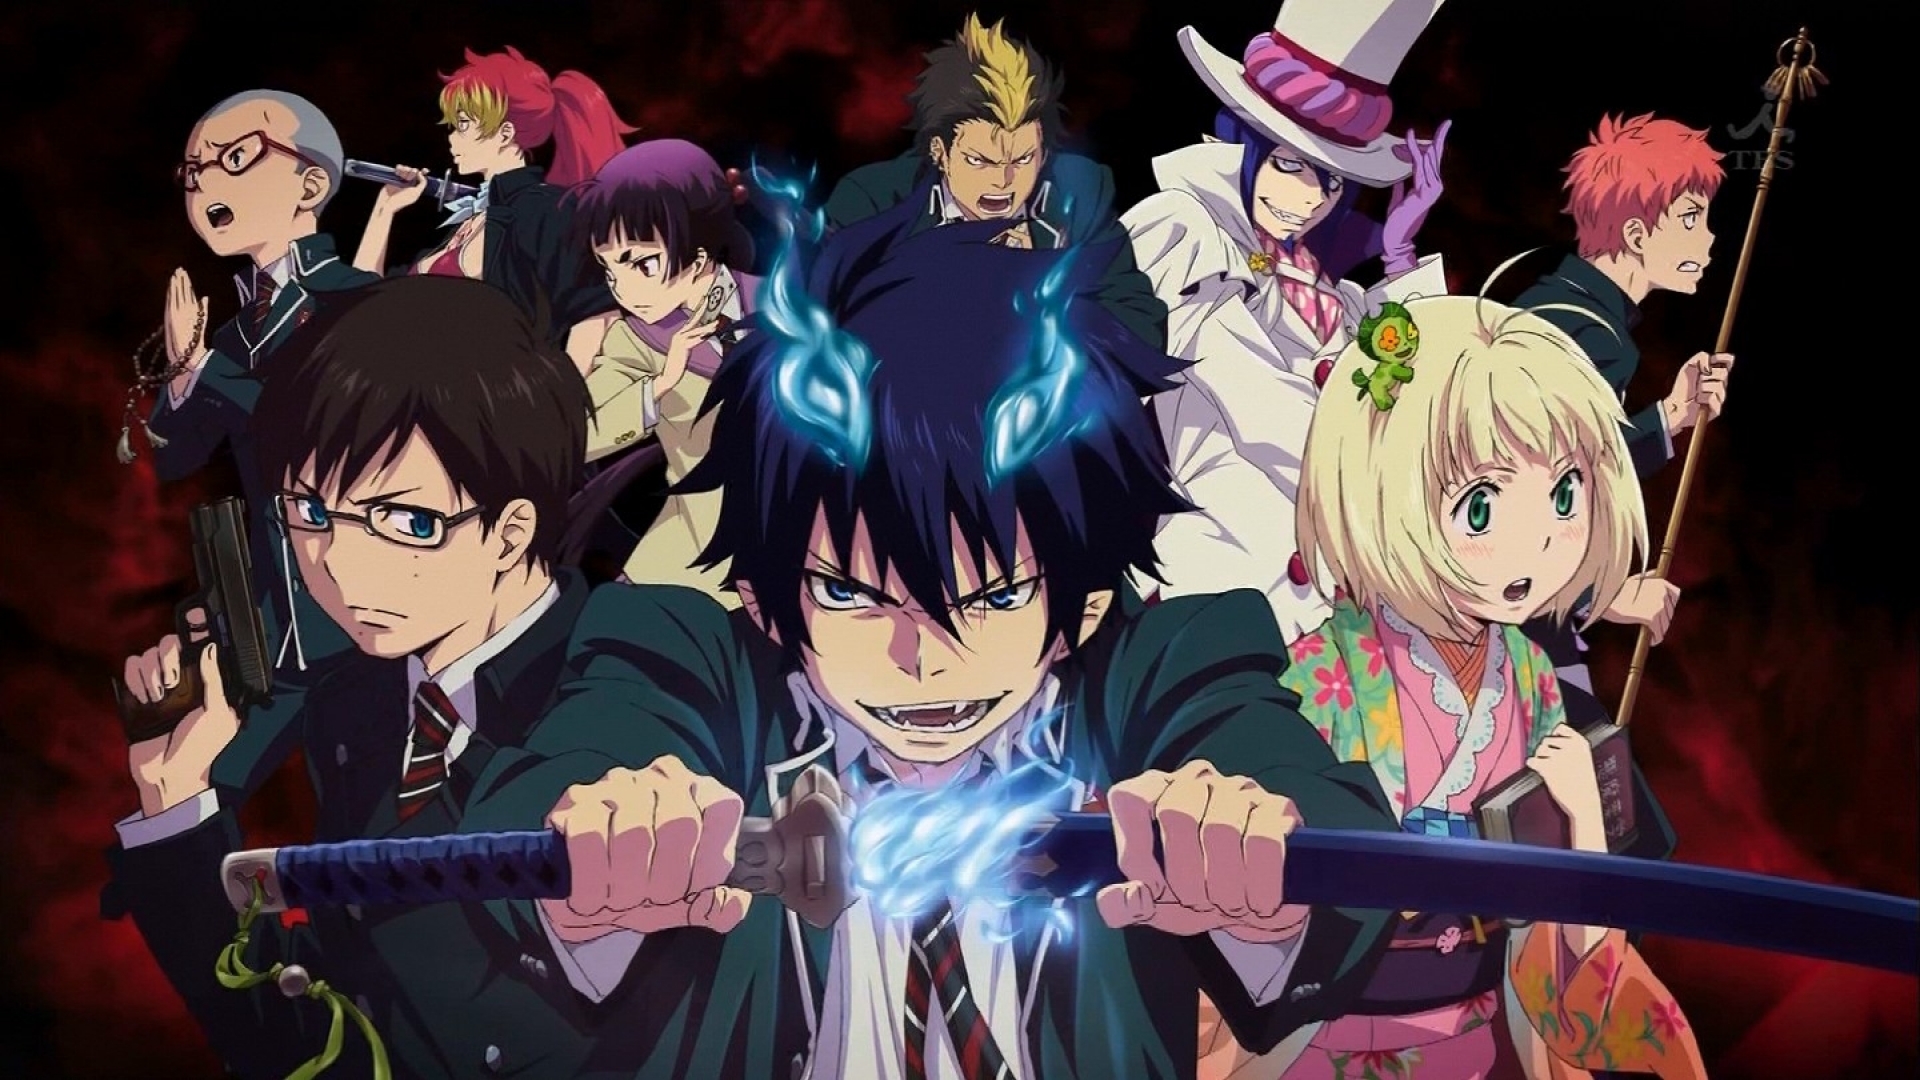 1. "Blue Exorcist" - wide 3